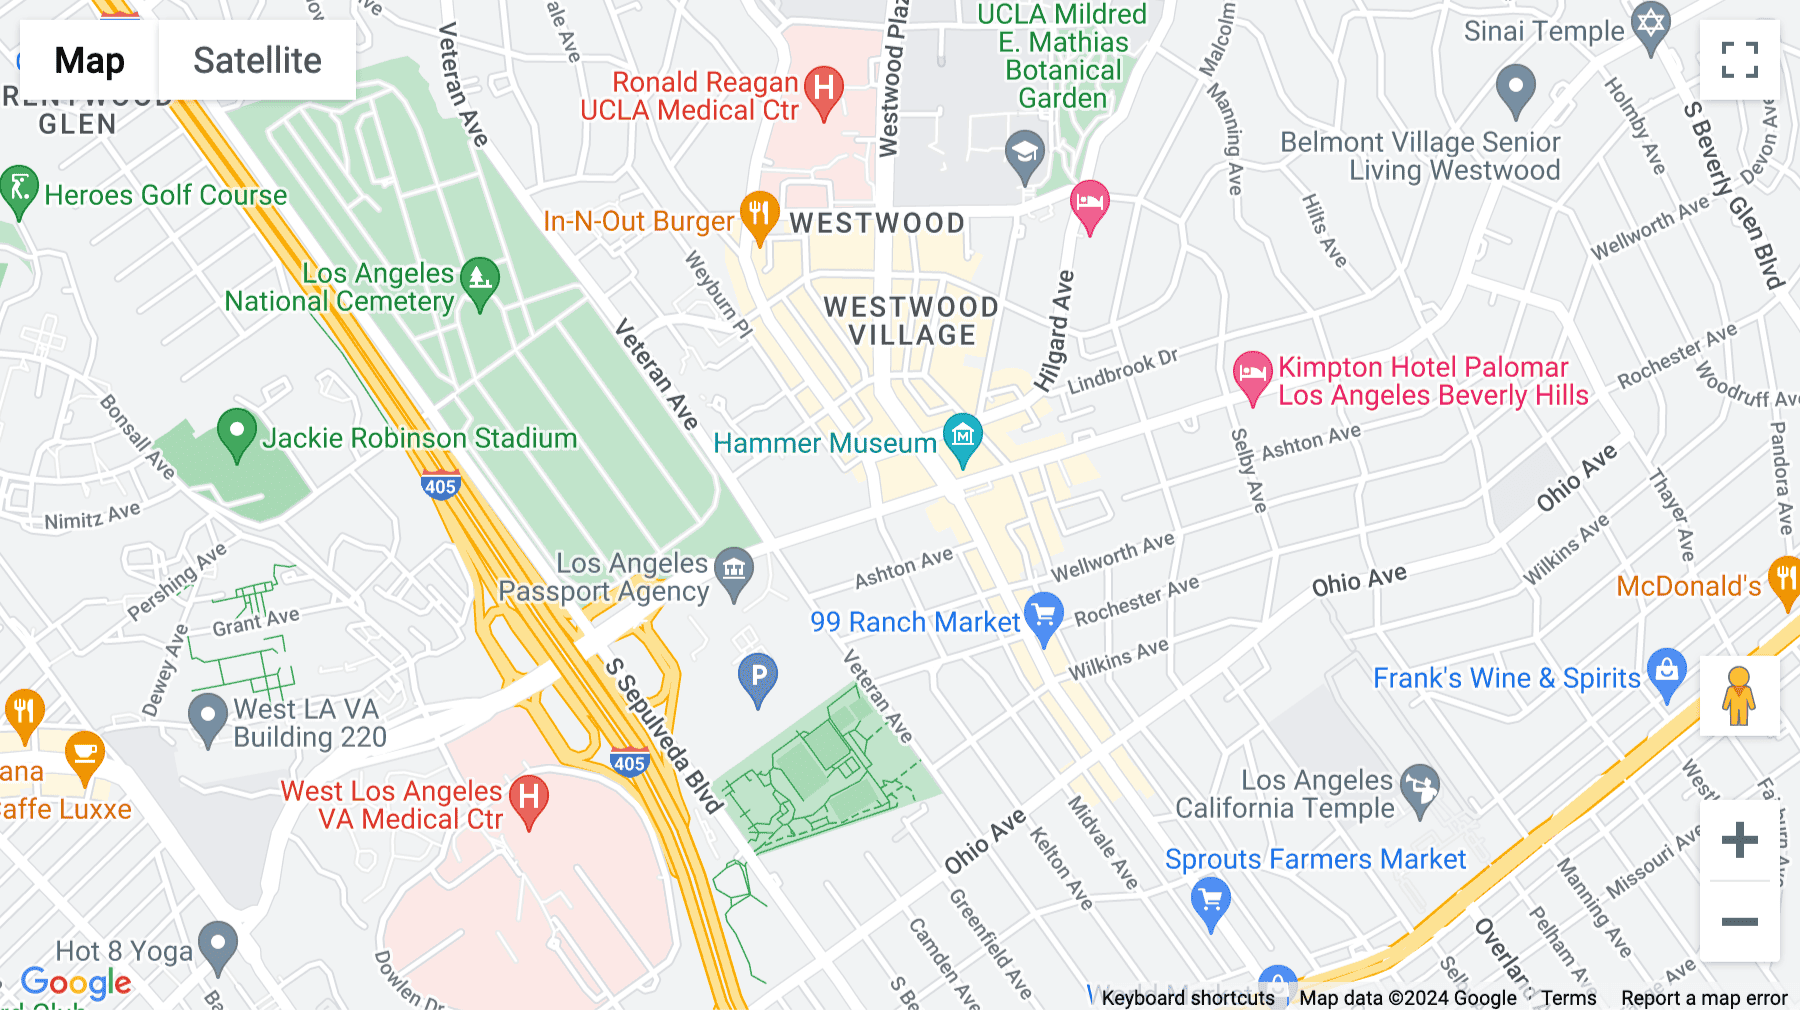 Click for interative map of 10940 Wilshire Blvd, Suite 1600, Tower Executive Suites, Los Angeles